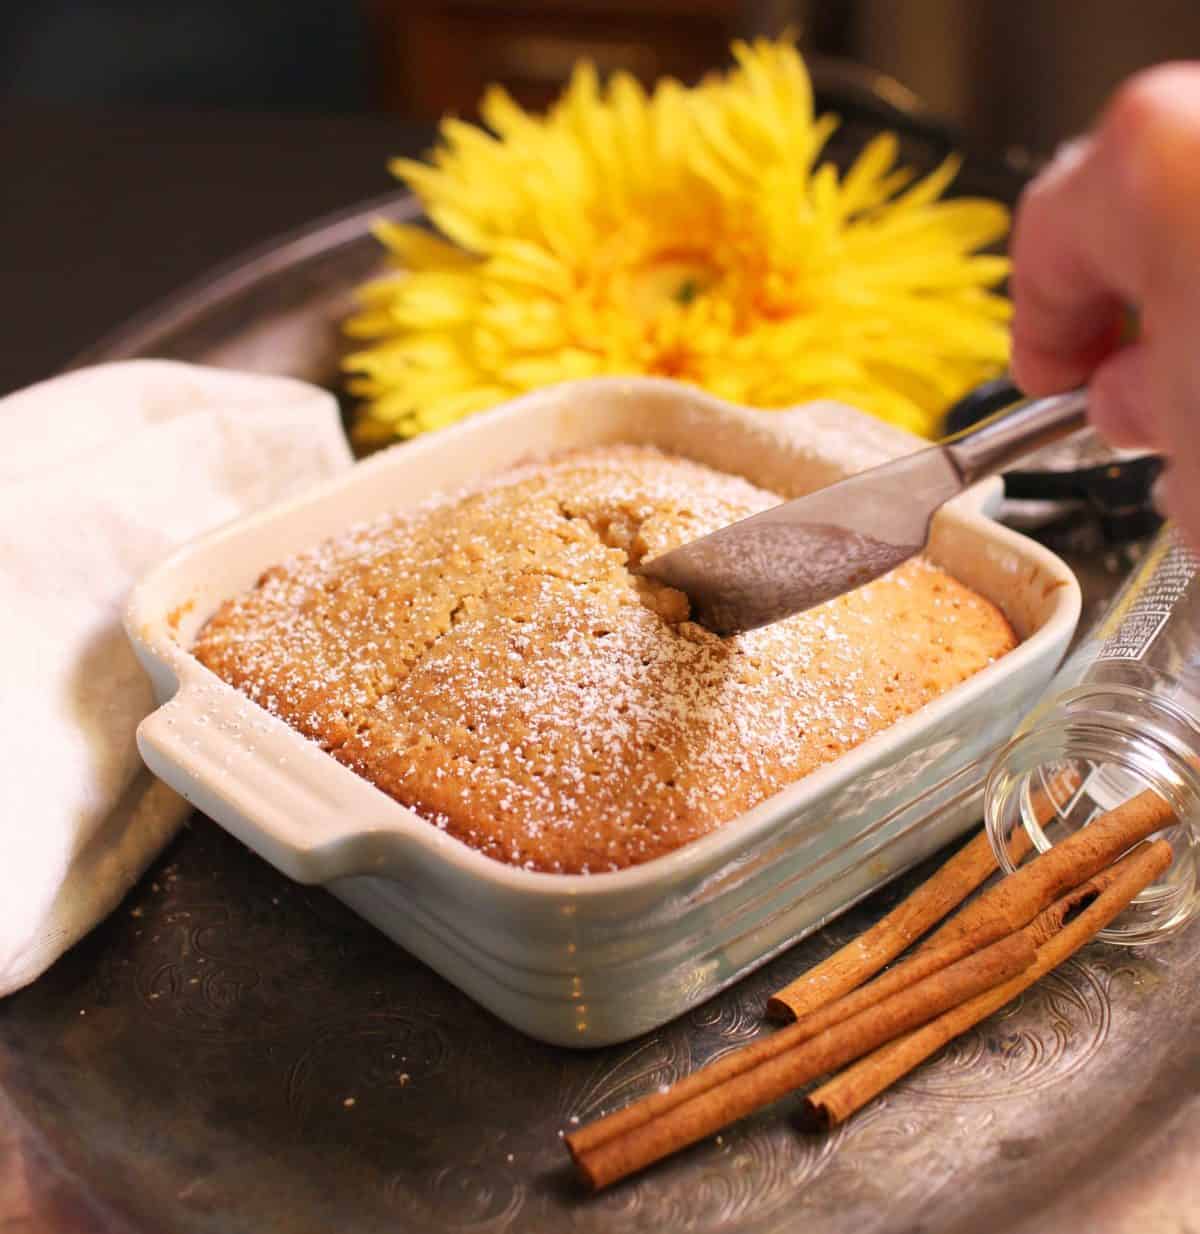 A knife cutting a piece of spice cake dusted with powdered sugar from a small baking dish on a metal tray with yellow flowers and cinnamon sticks.